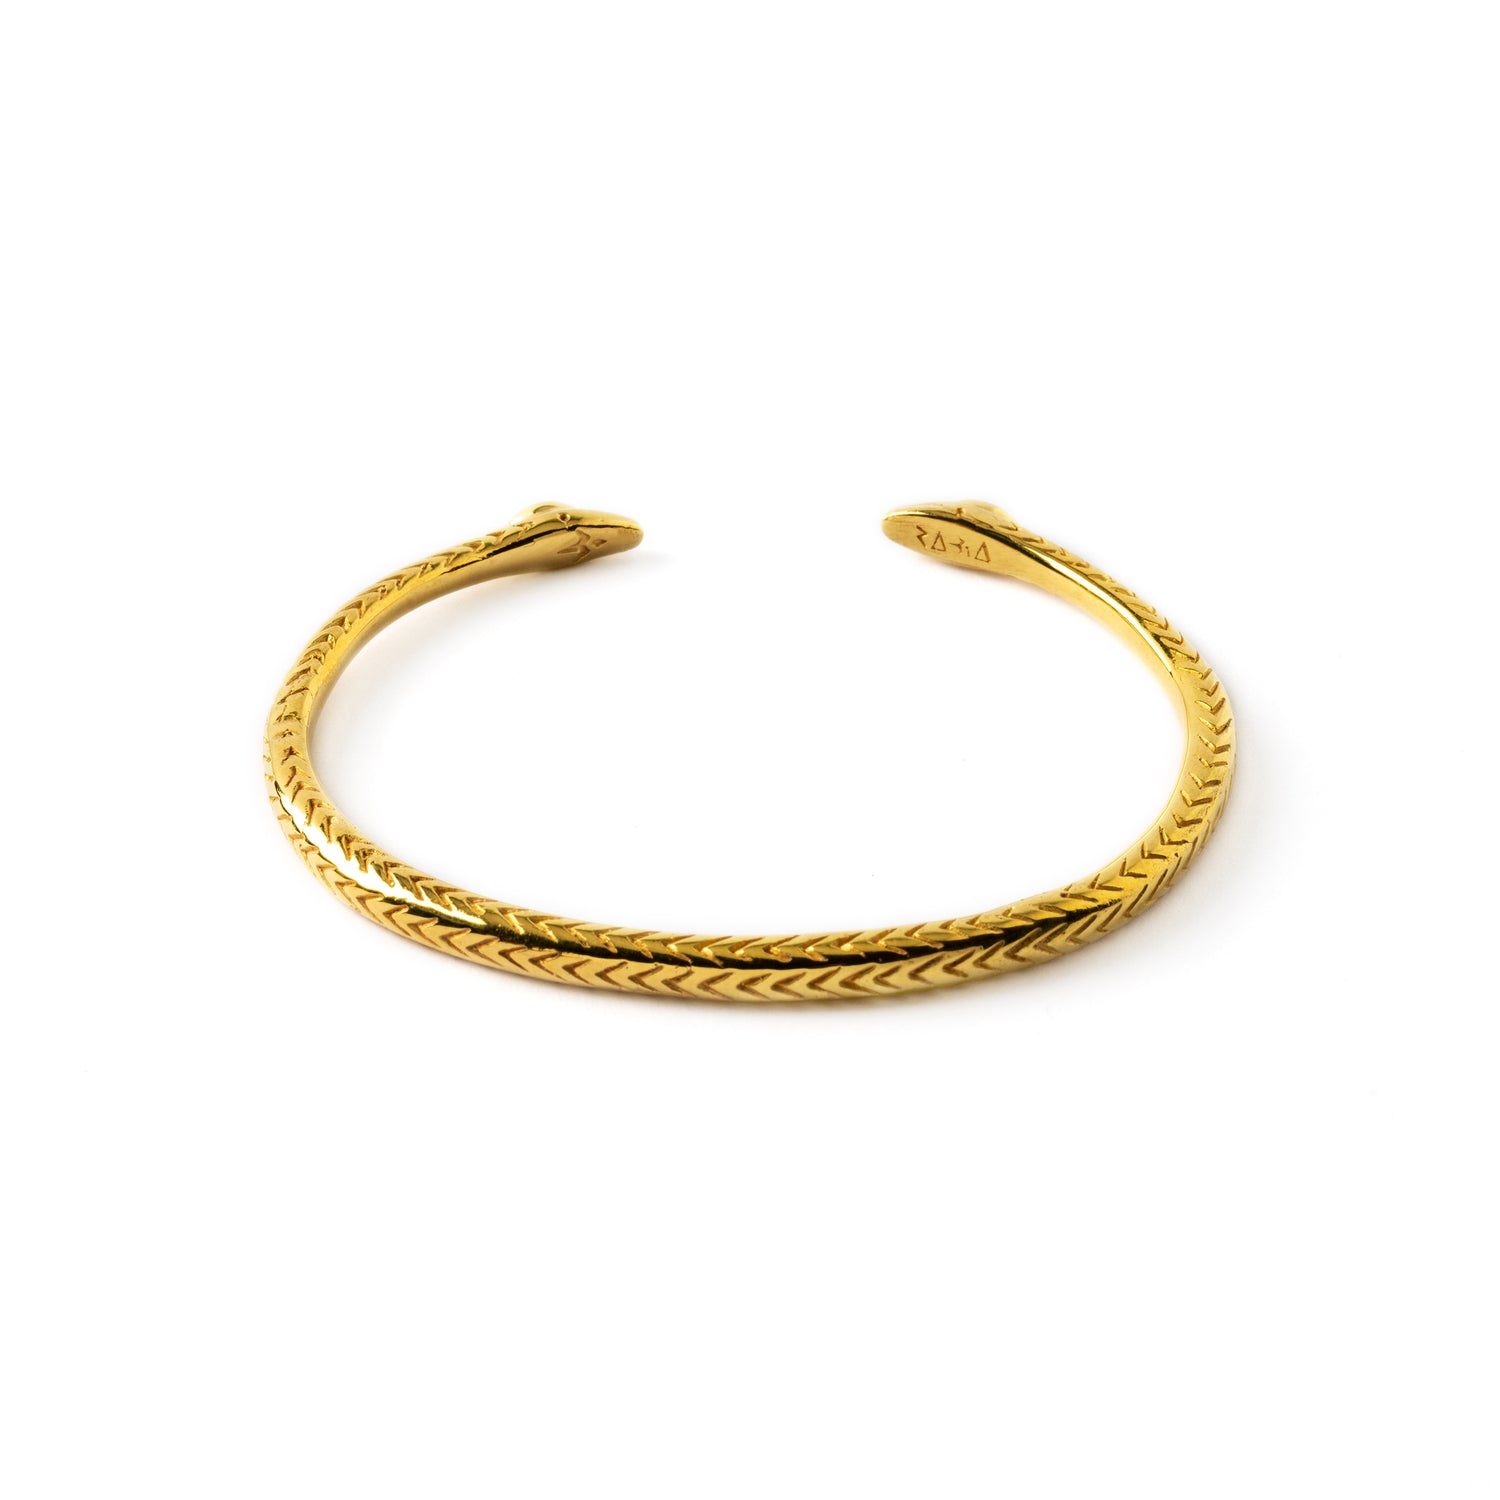 Nagi Gold Cuff with Emerald back side view